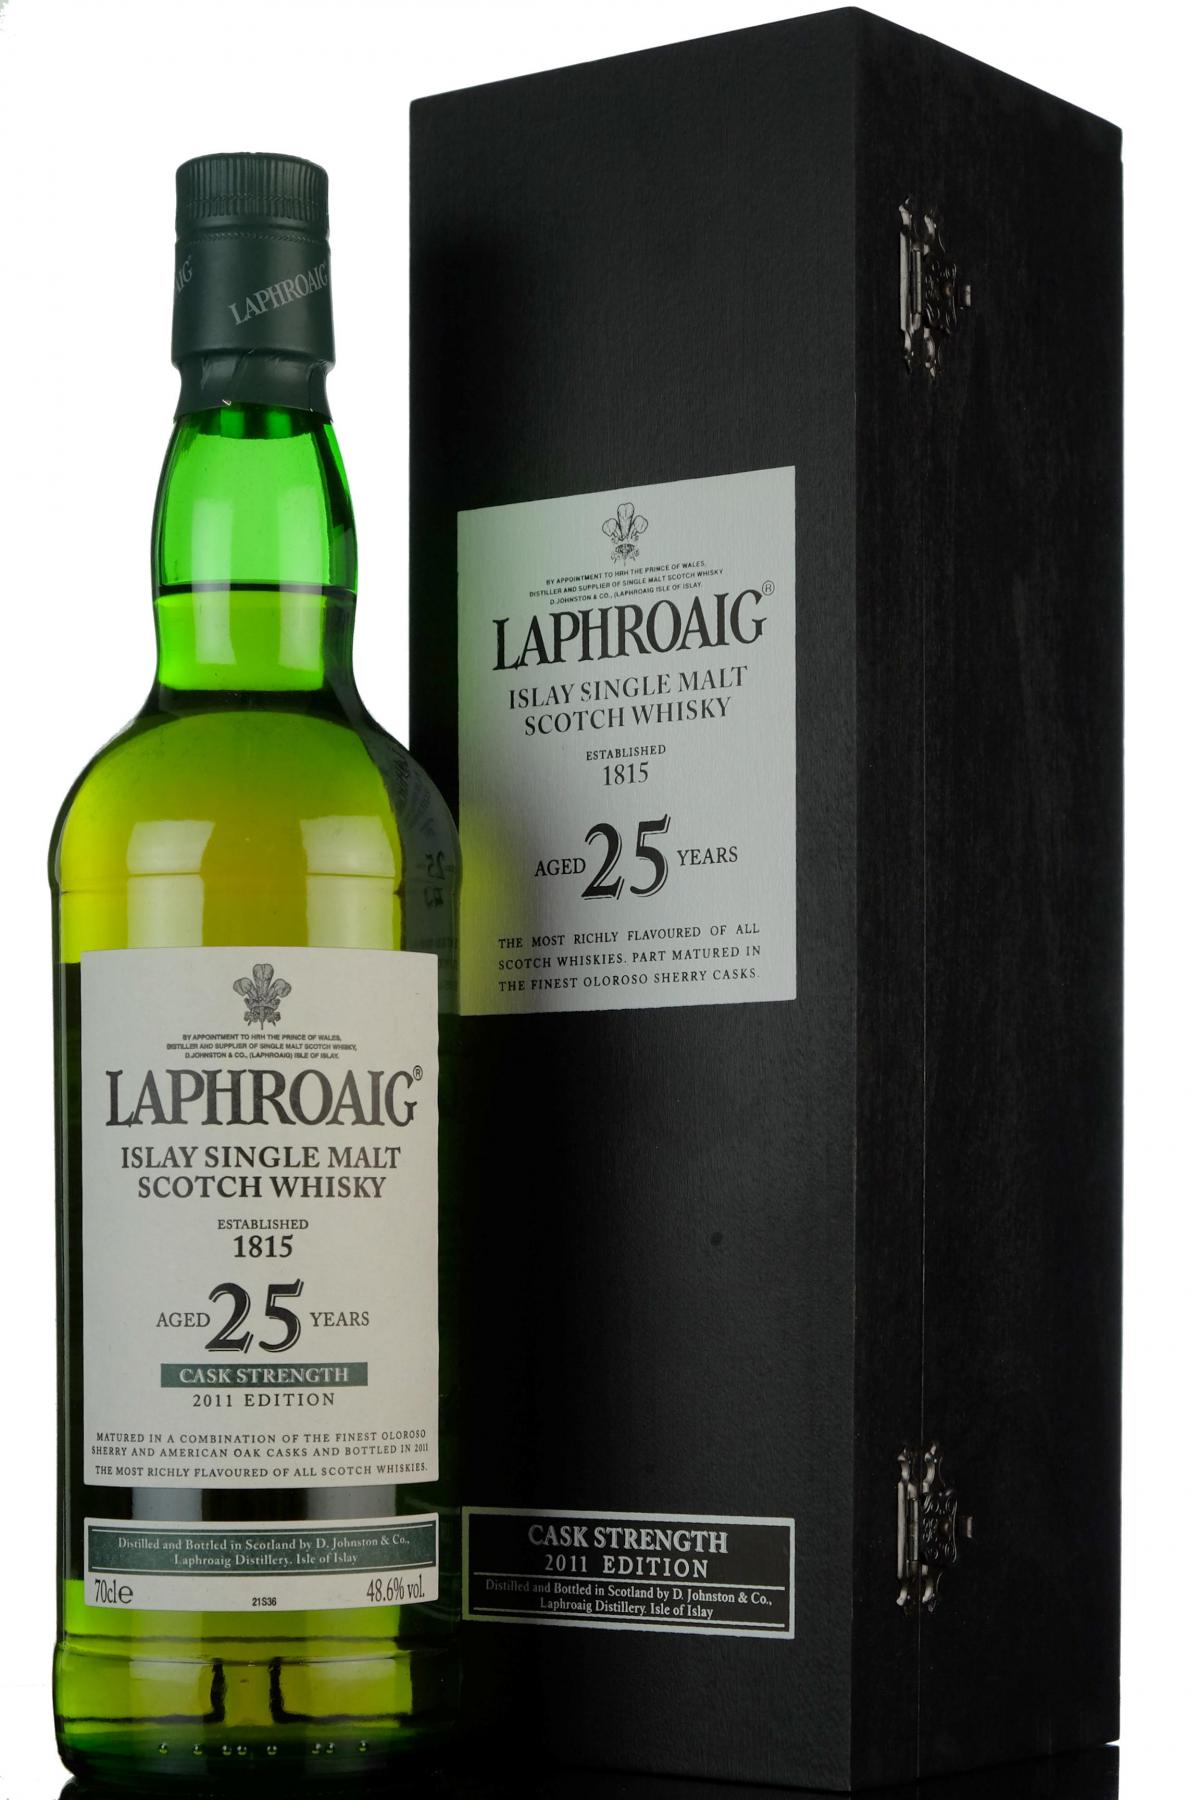 Laphroaig 25 Year Old - Cask Strength - 2011 Edition